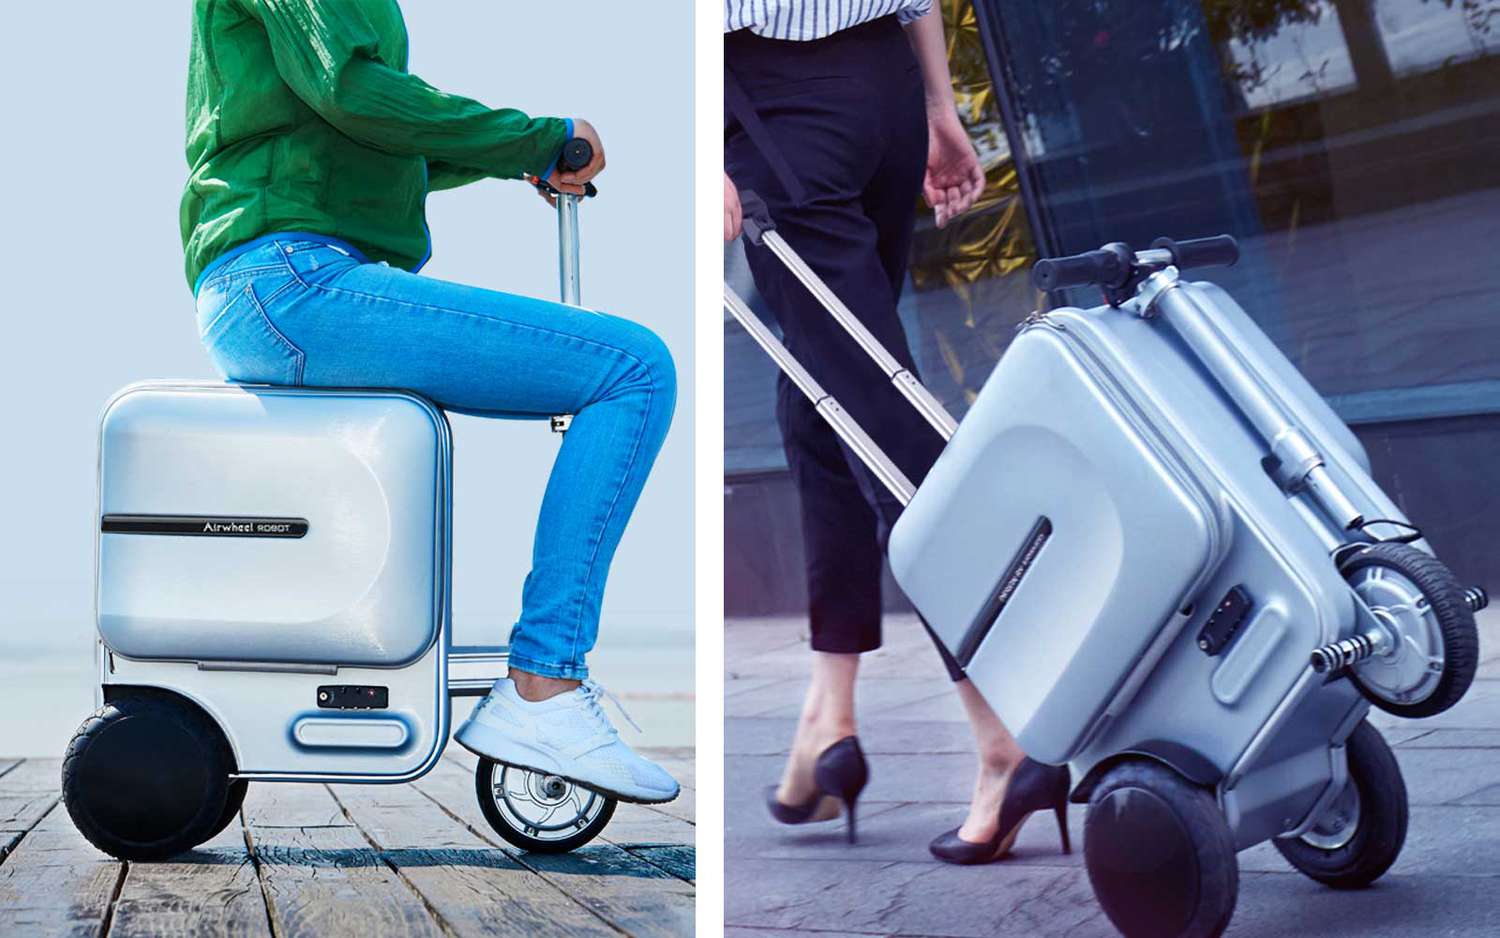 Tech Meets Travel: The Wonders of Electronic Suitcases